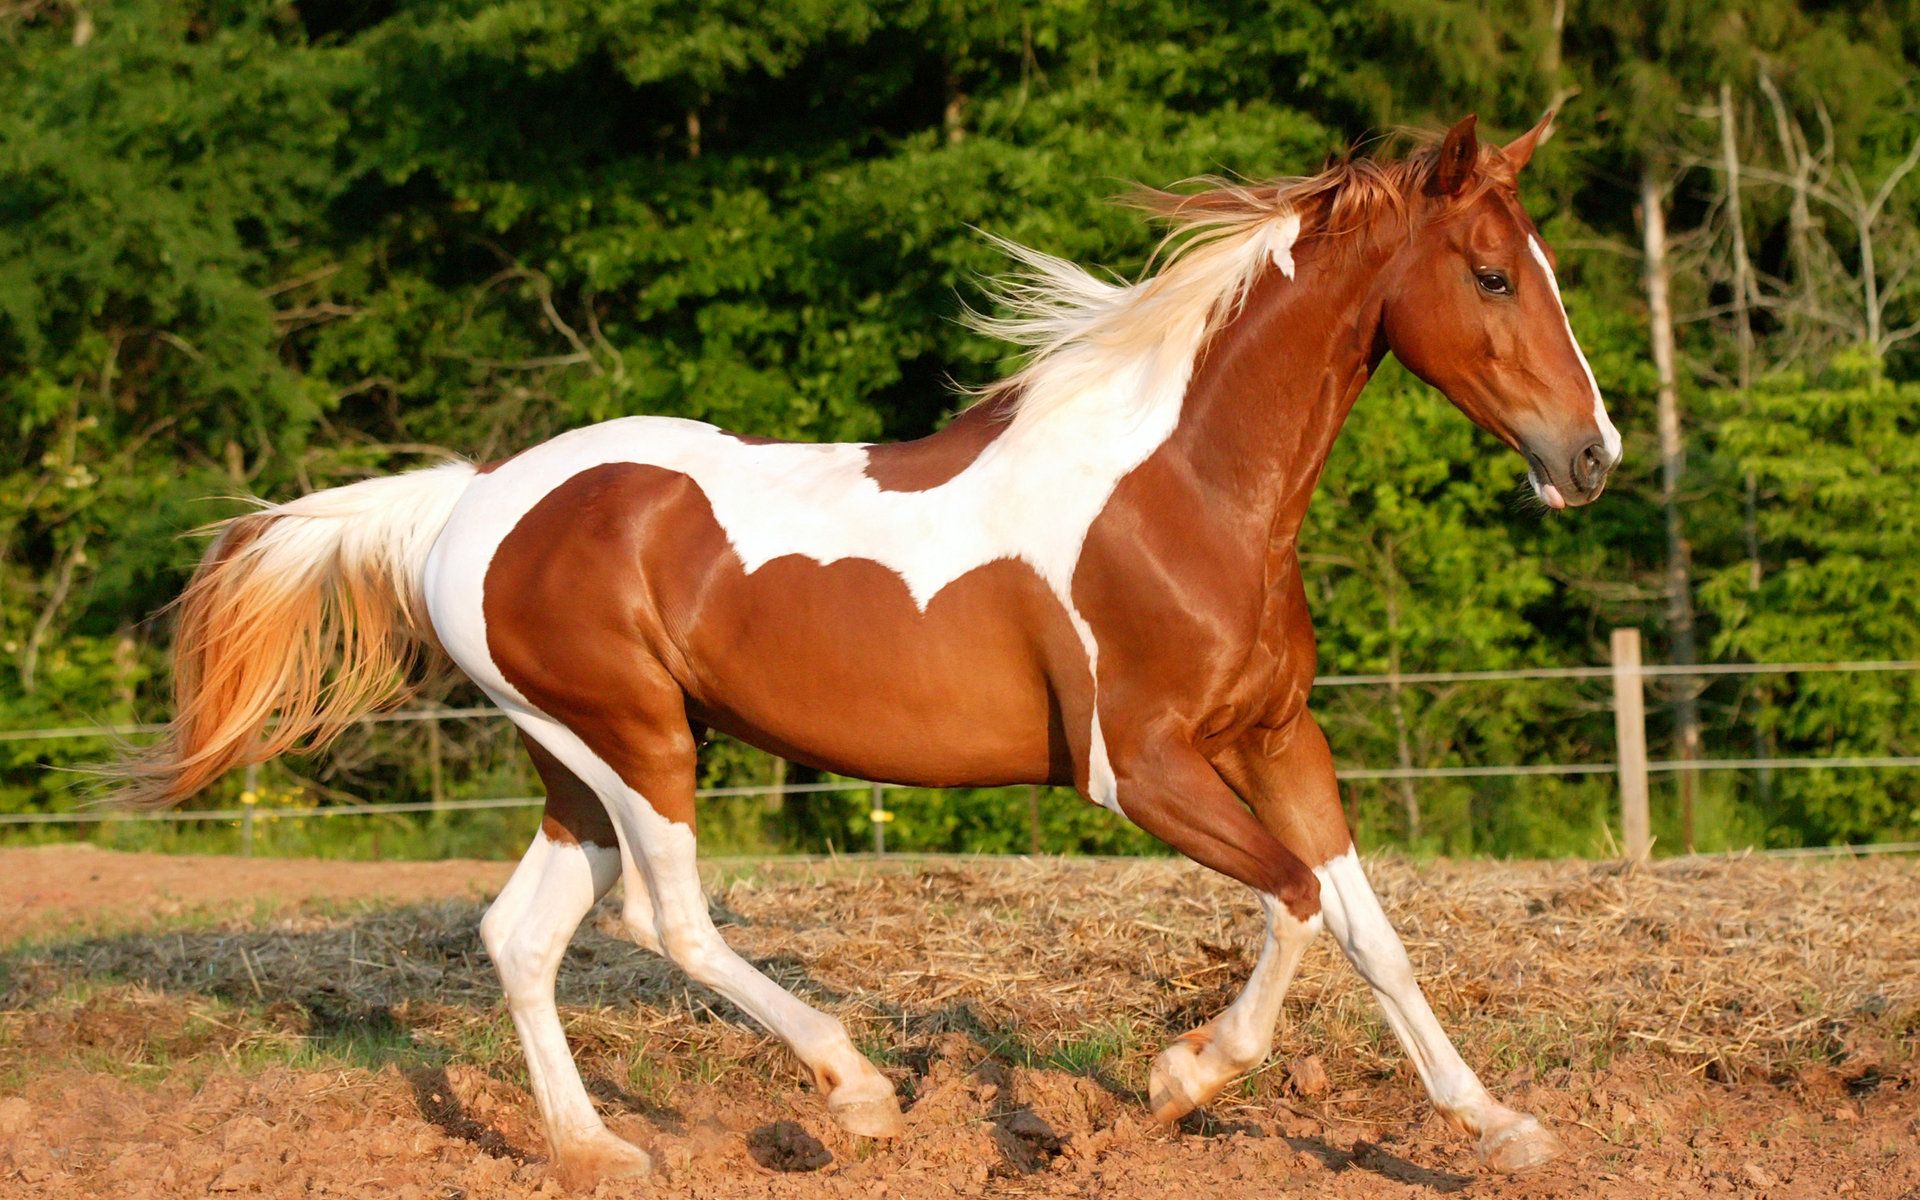 Riding horse wallpapers and images - wallpapers, pictures, photos